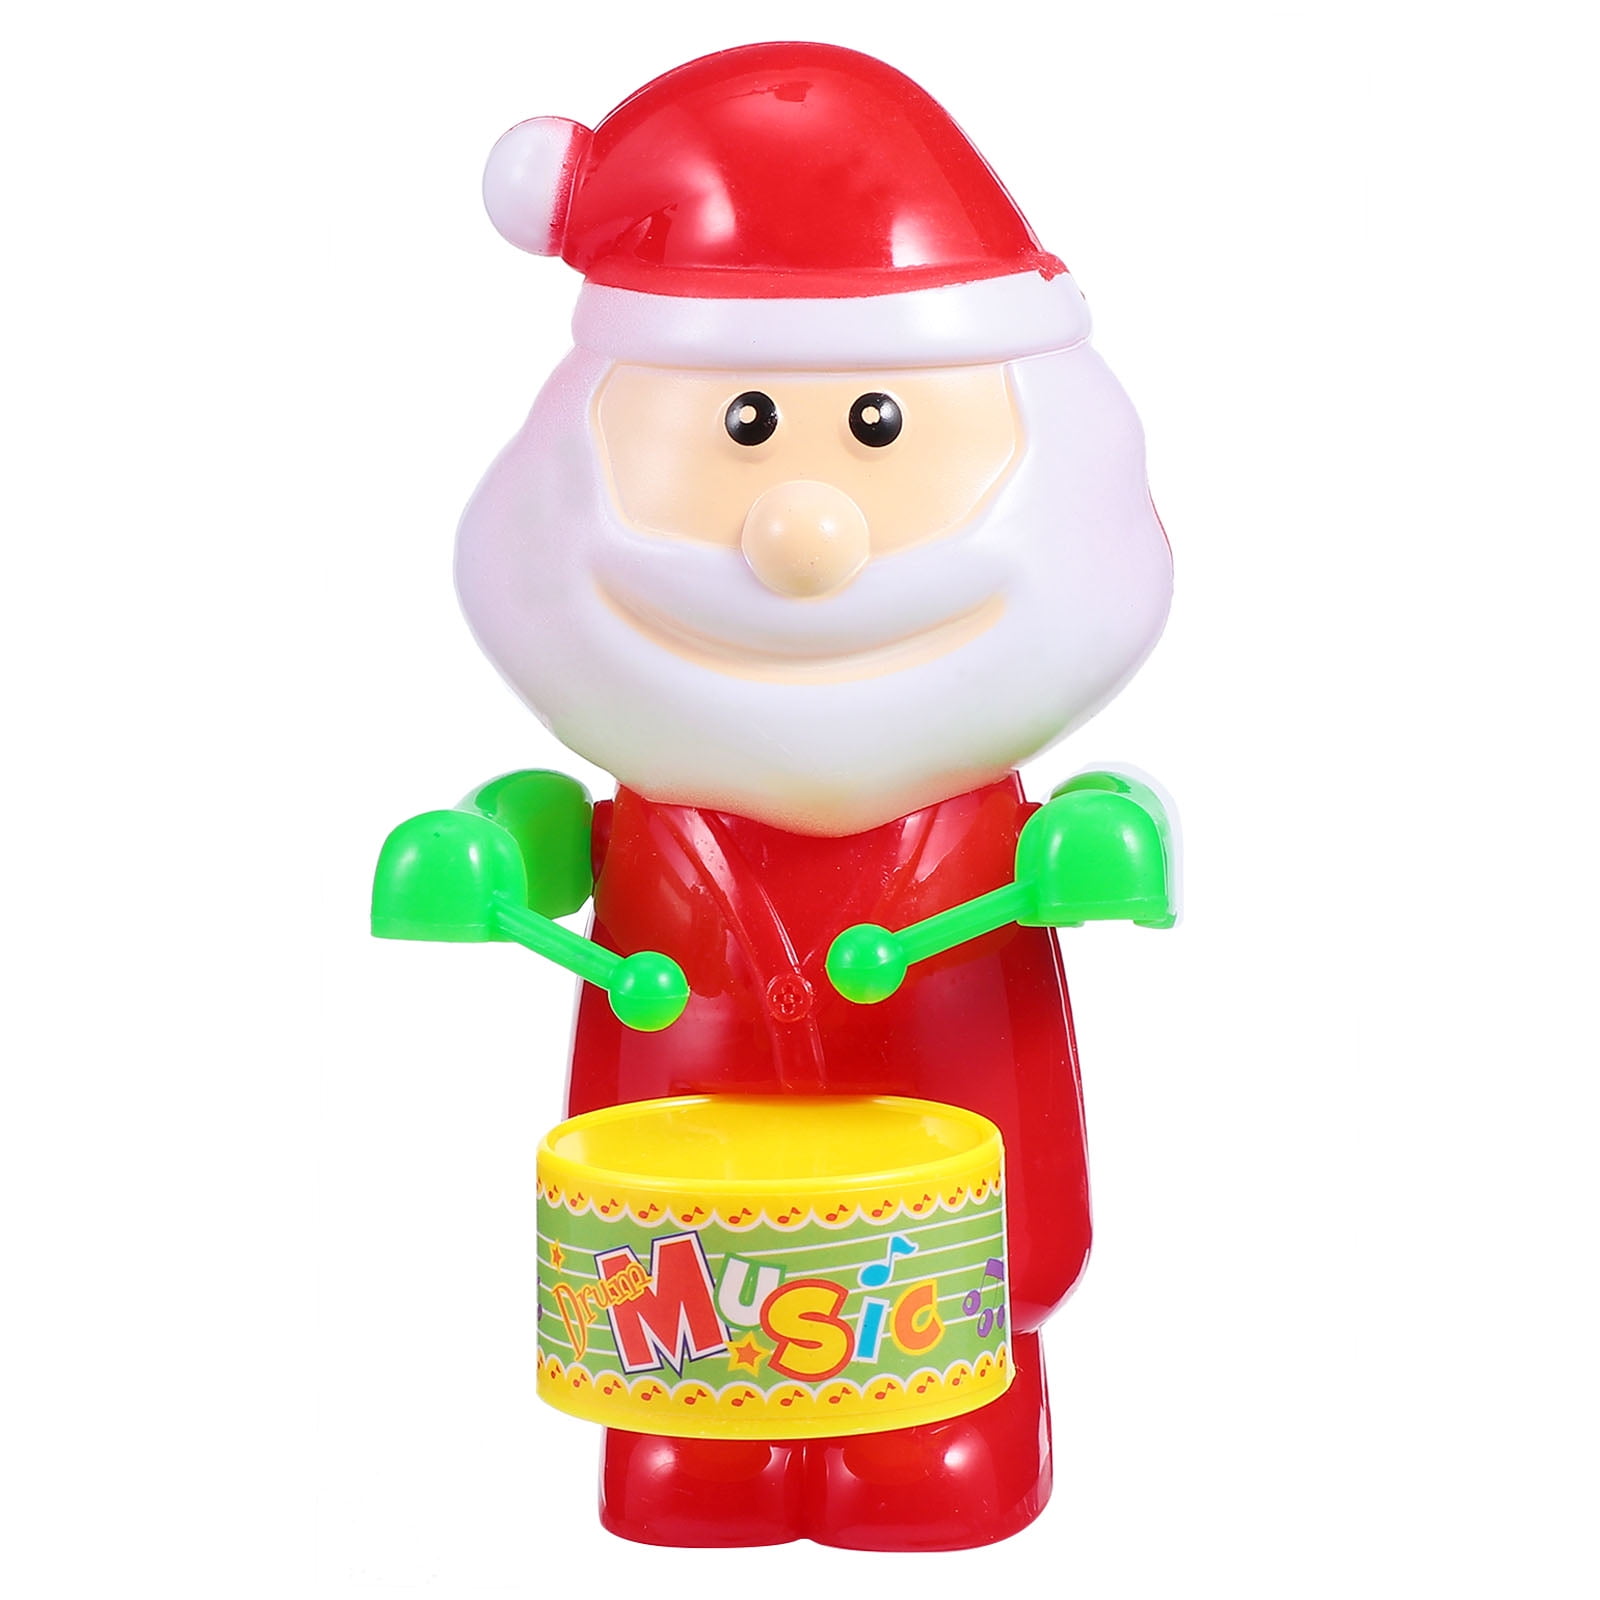 Christmas Gifts Children Clockwork Toys Wind-Up Toys Drummer Santa Claus Toy 